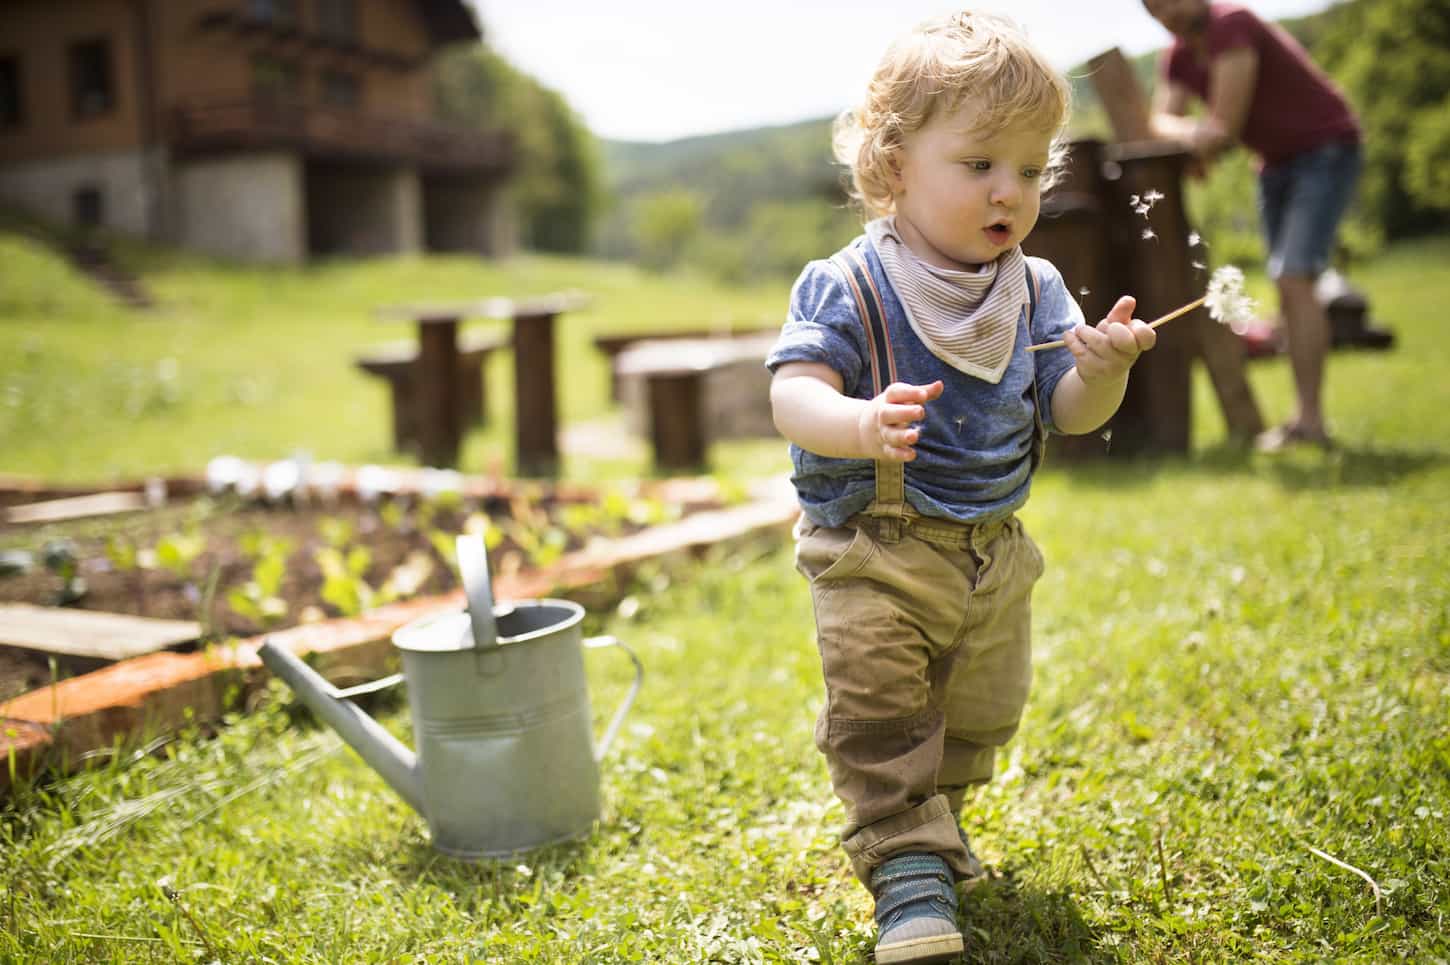 An image of a Boy playing in the garden with a watering can and a father in background.